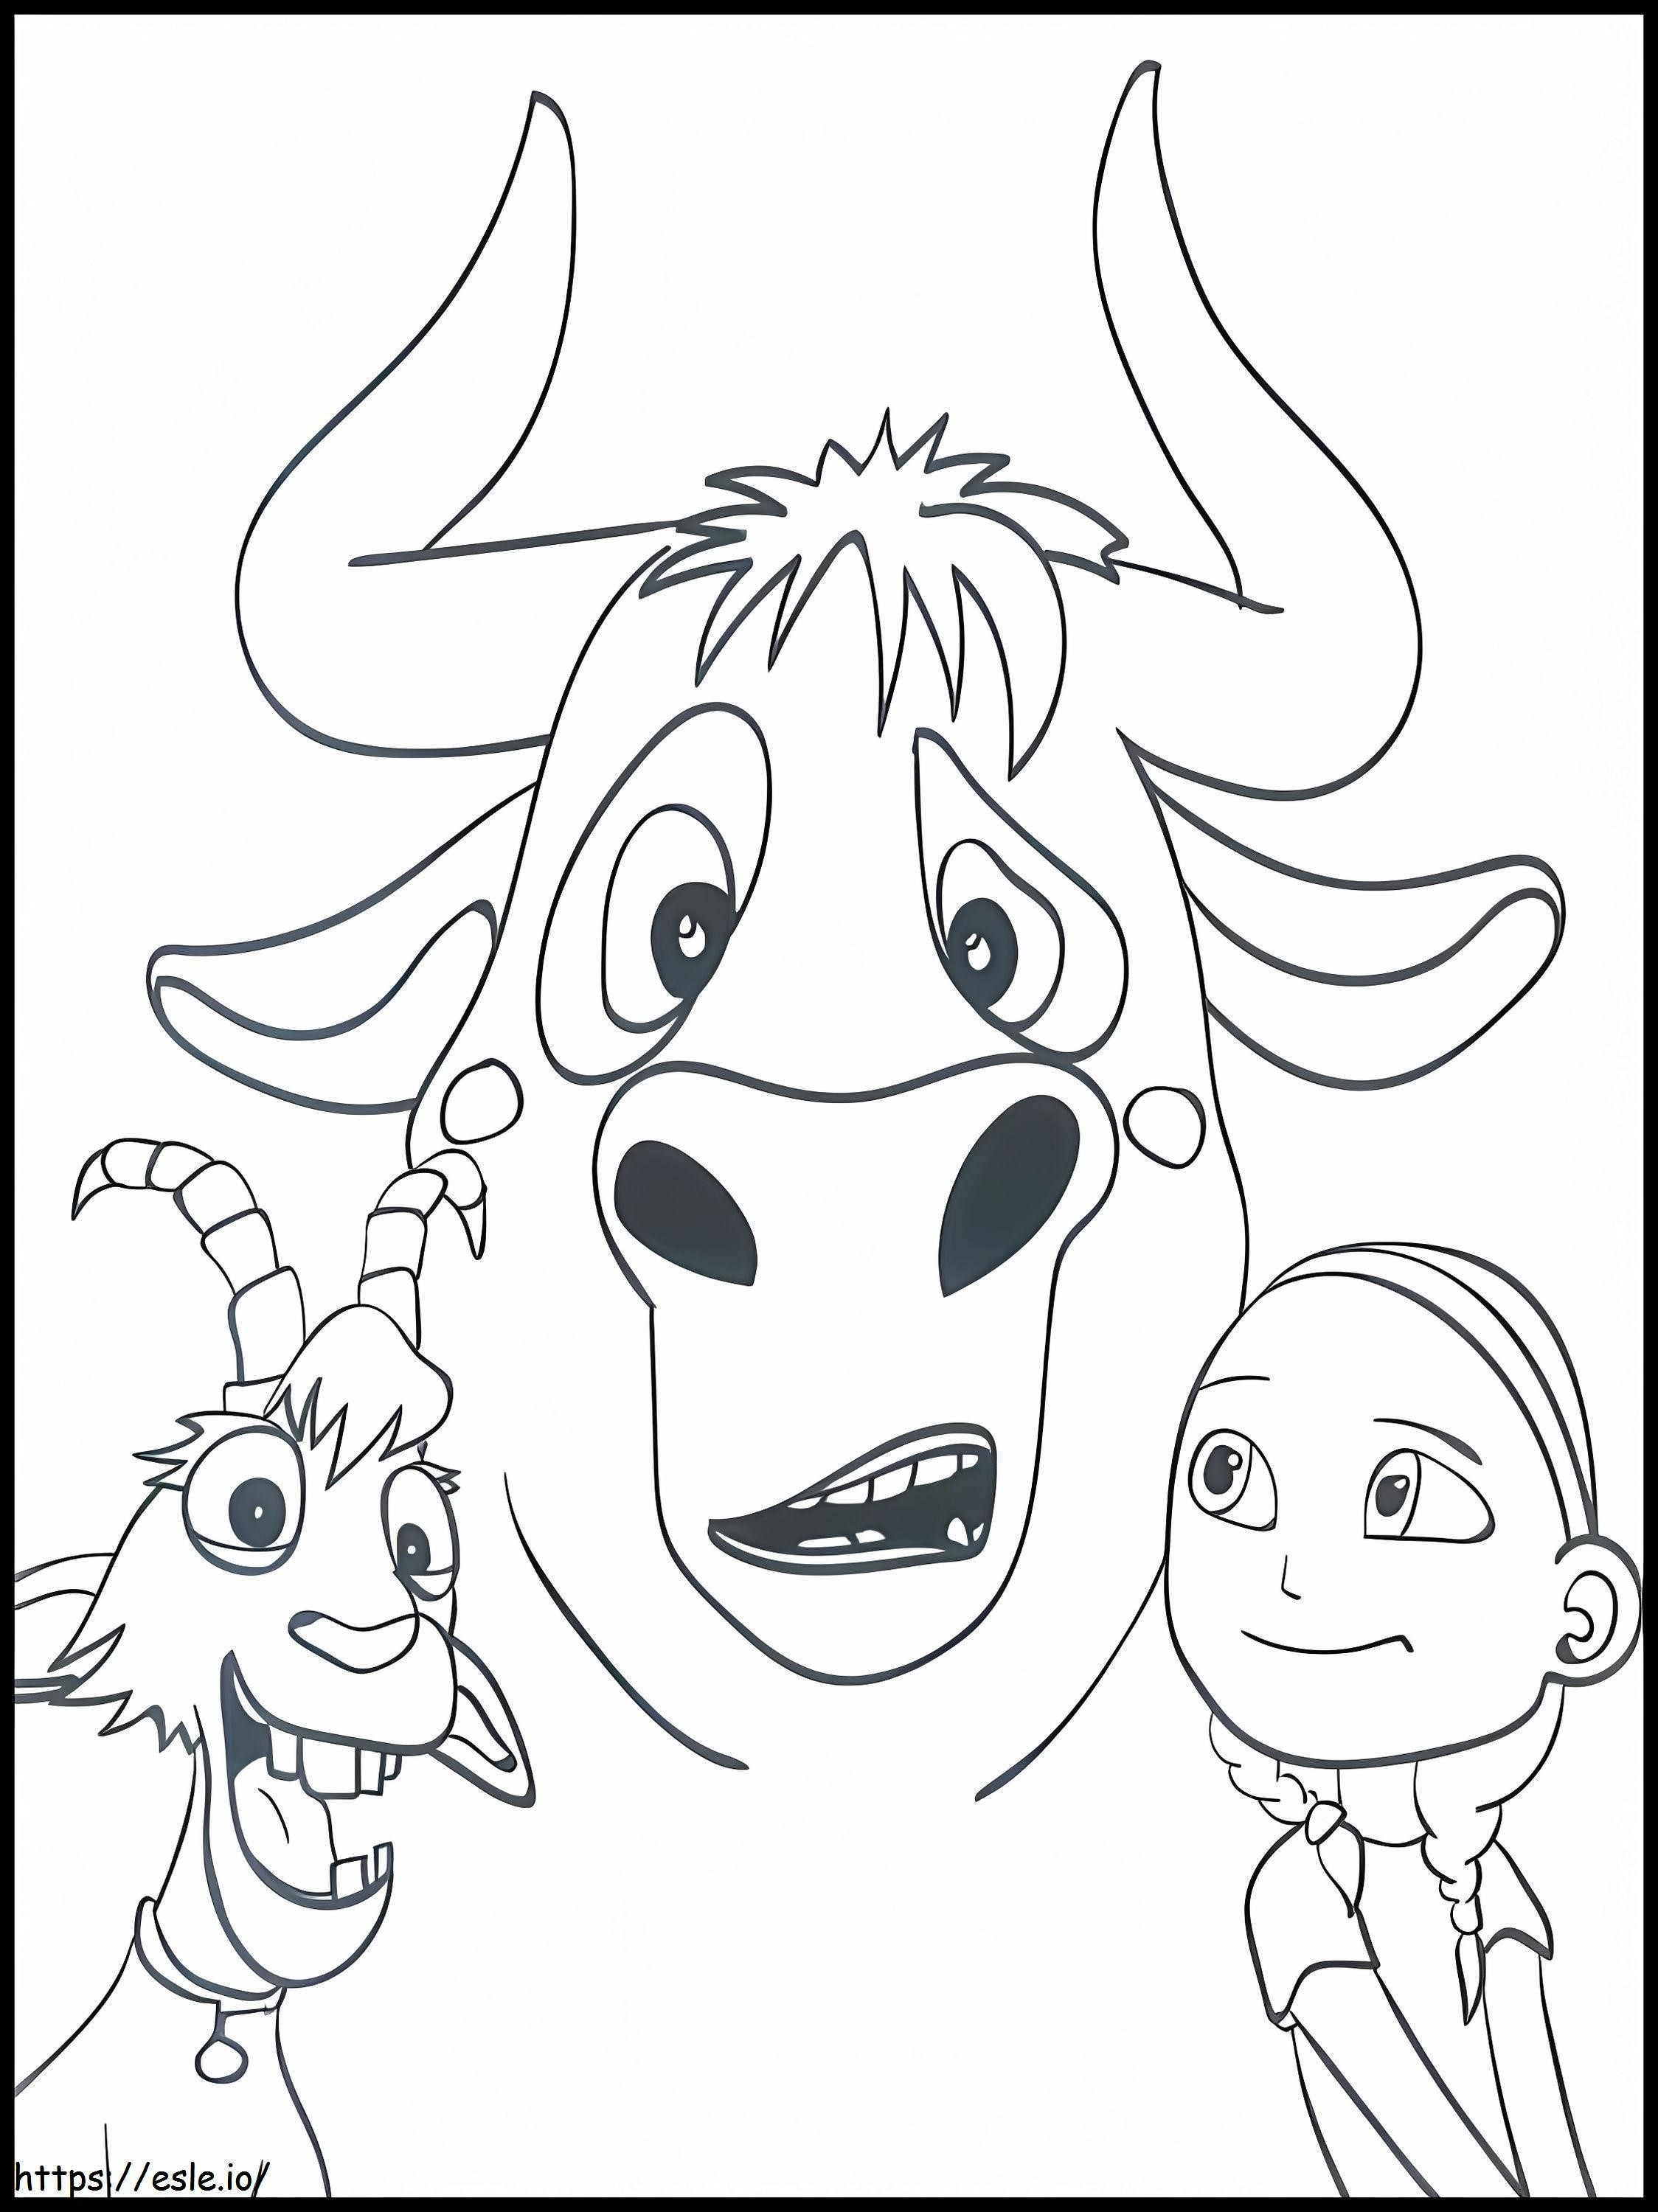 Ferdinand Lupe And Nina coloring page